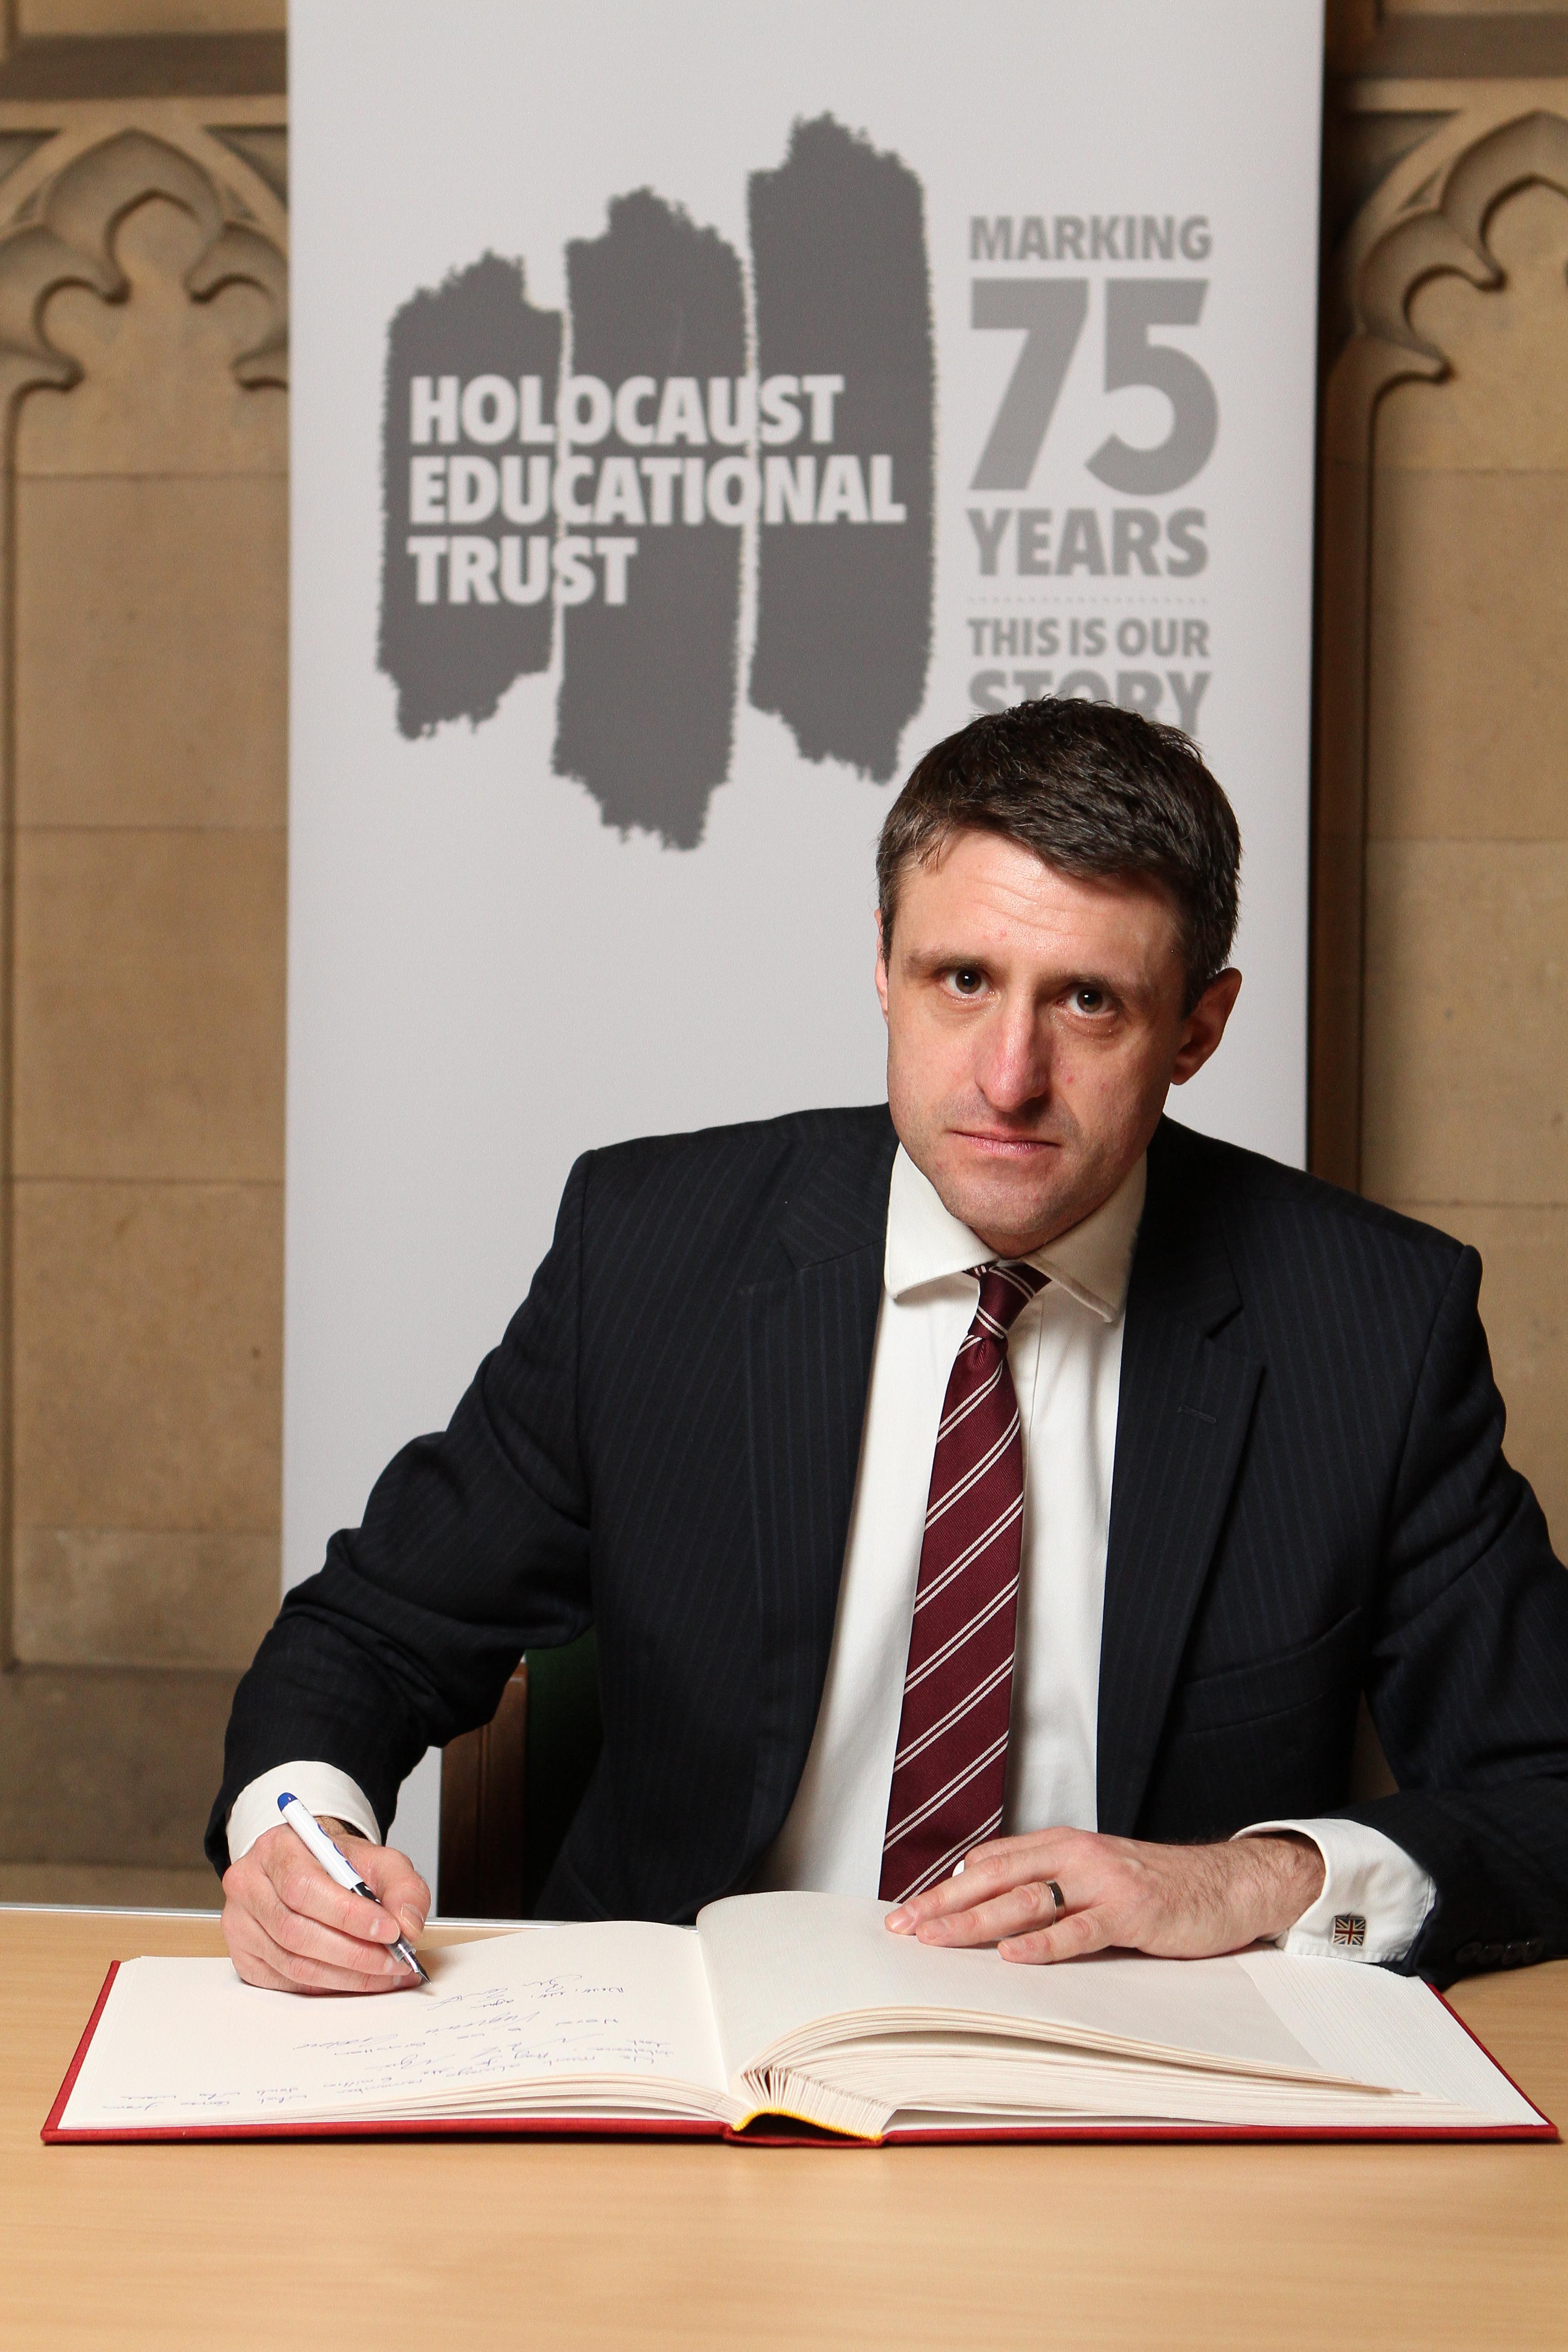 Ben Signs Holocaust Educational Trust's Book of Commitment